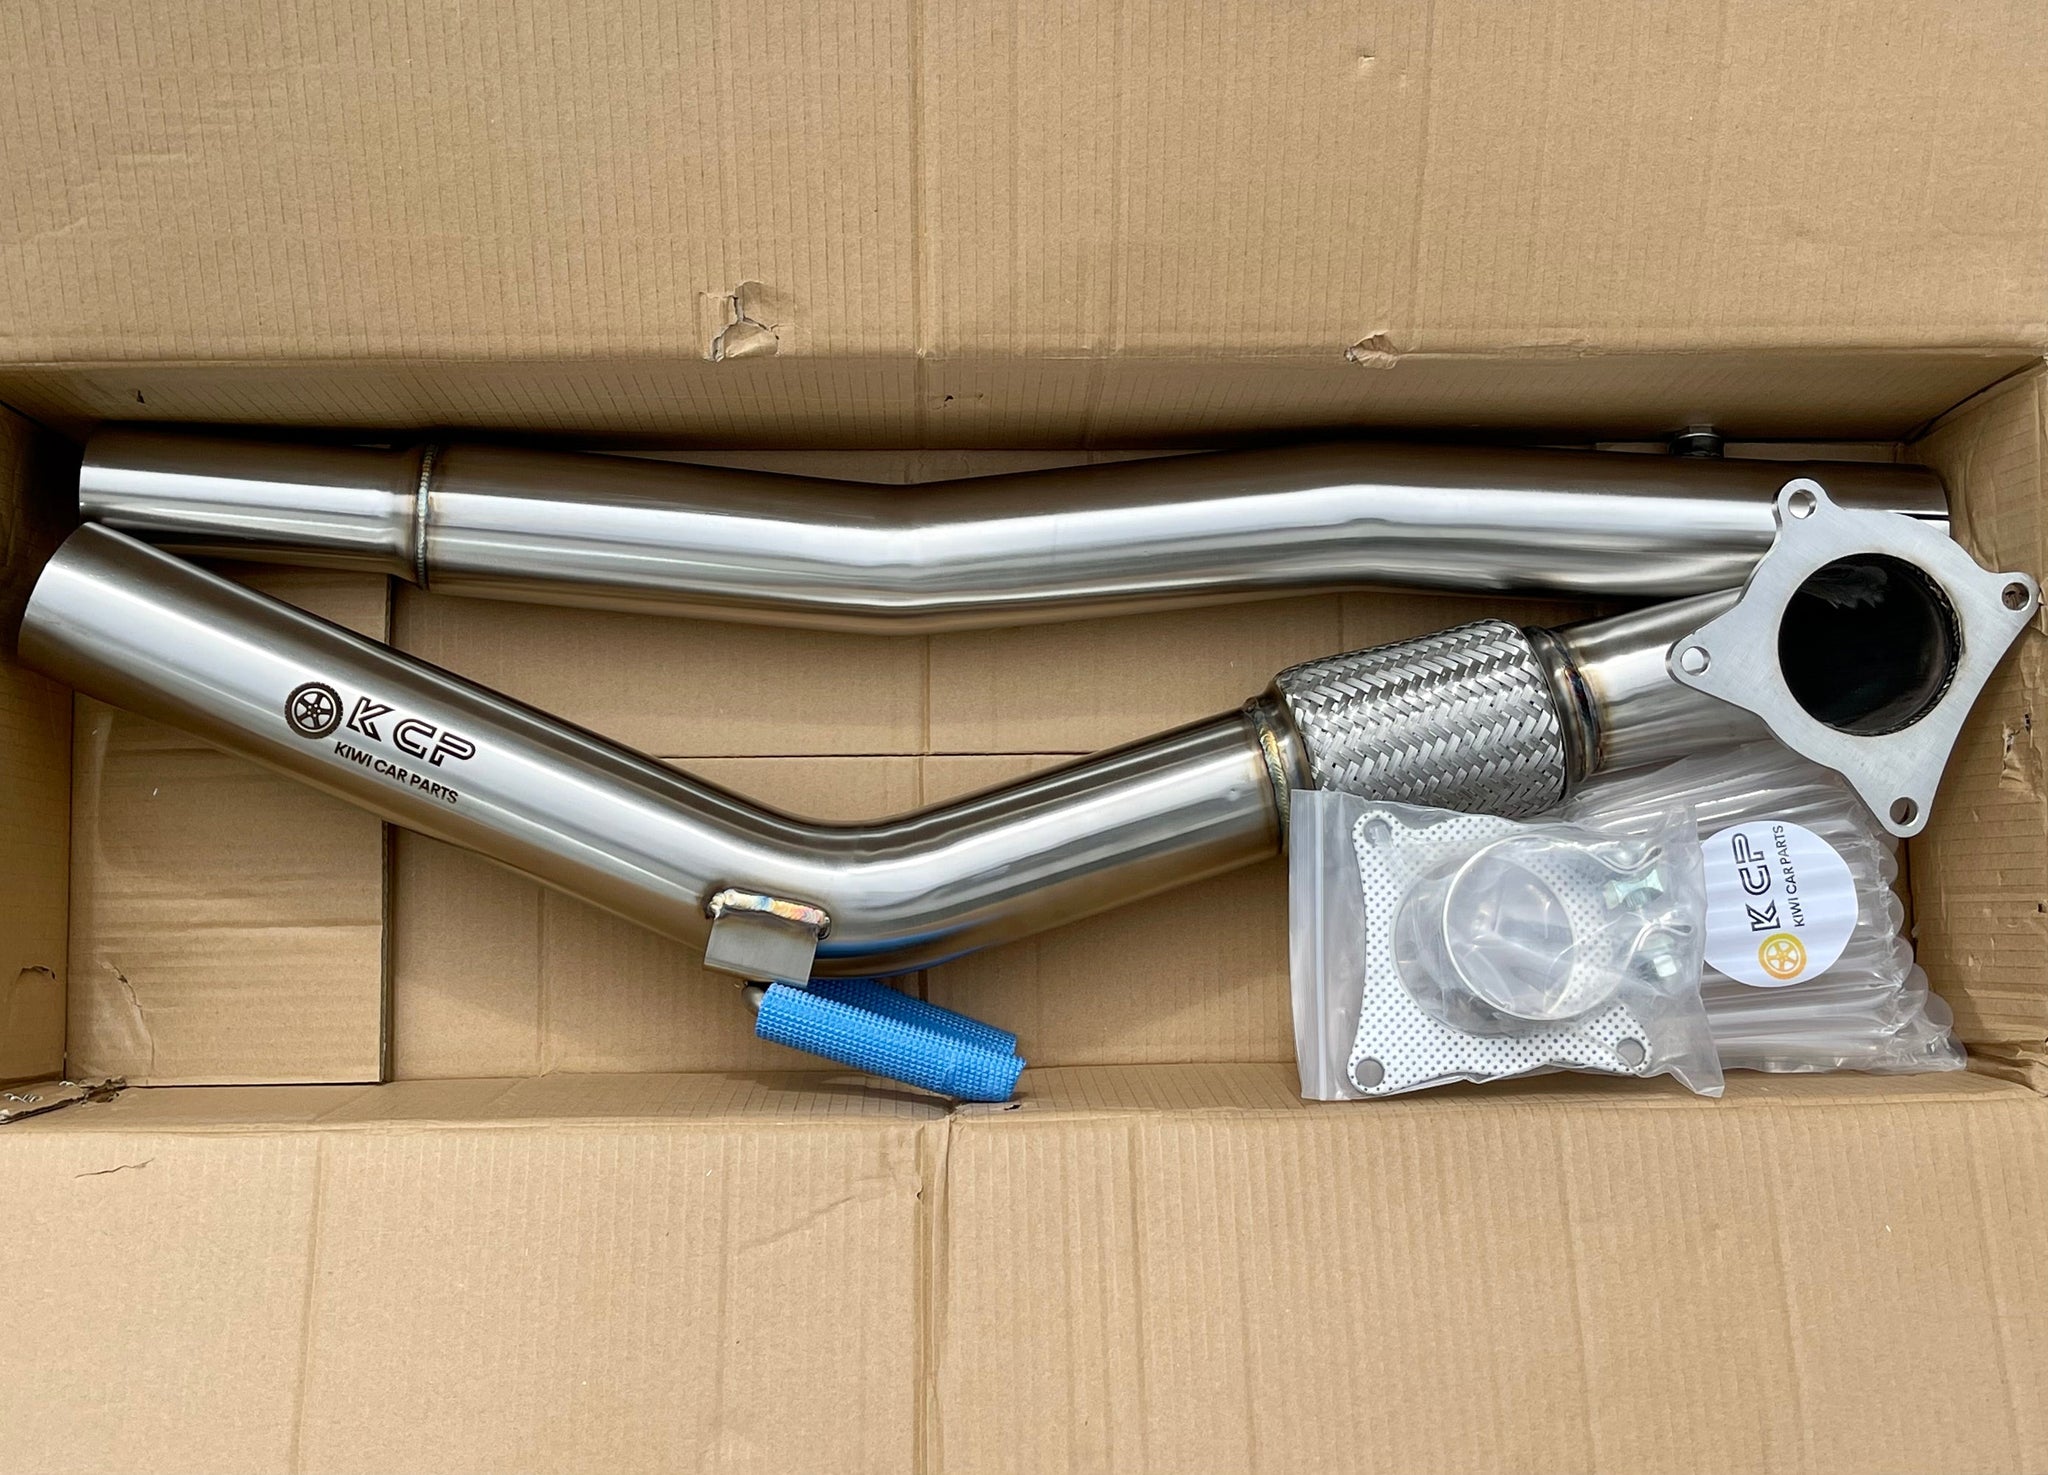 ** SPECIAL** KCP Stainless Decat Downpipe Suit For VW Golf MK5 MK6 GTI Audi A3 8P 2.0T 1.8T Exhaust